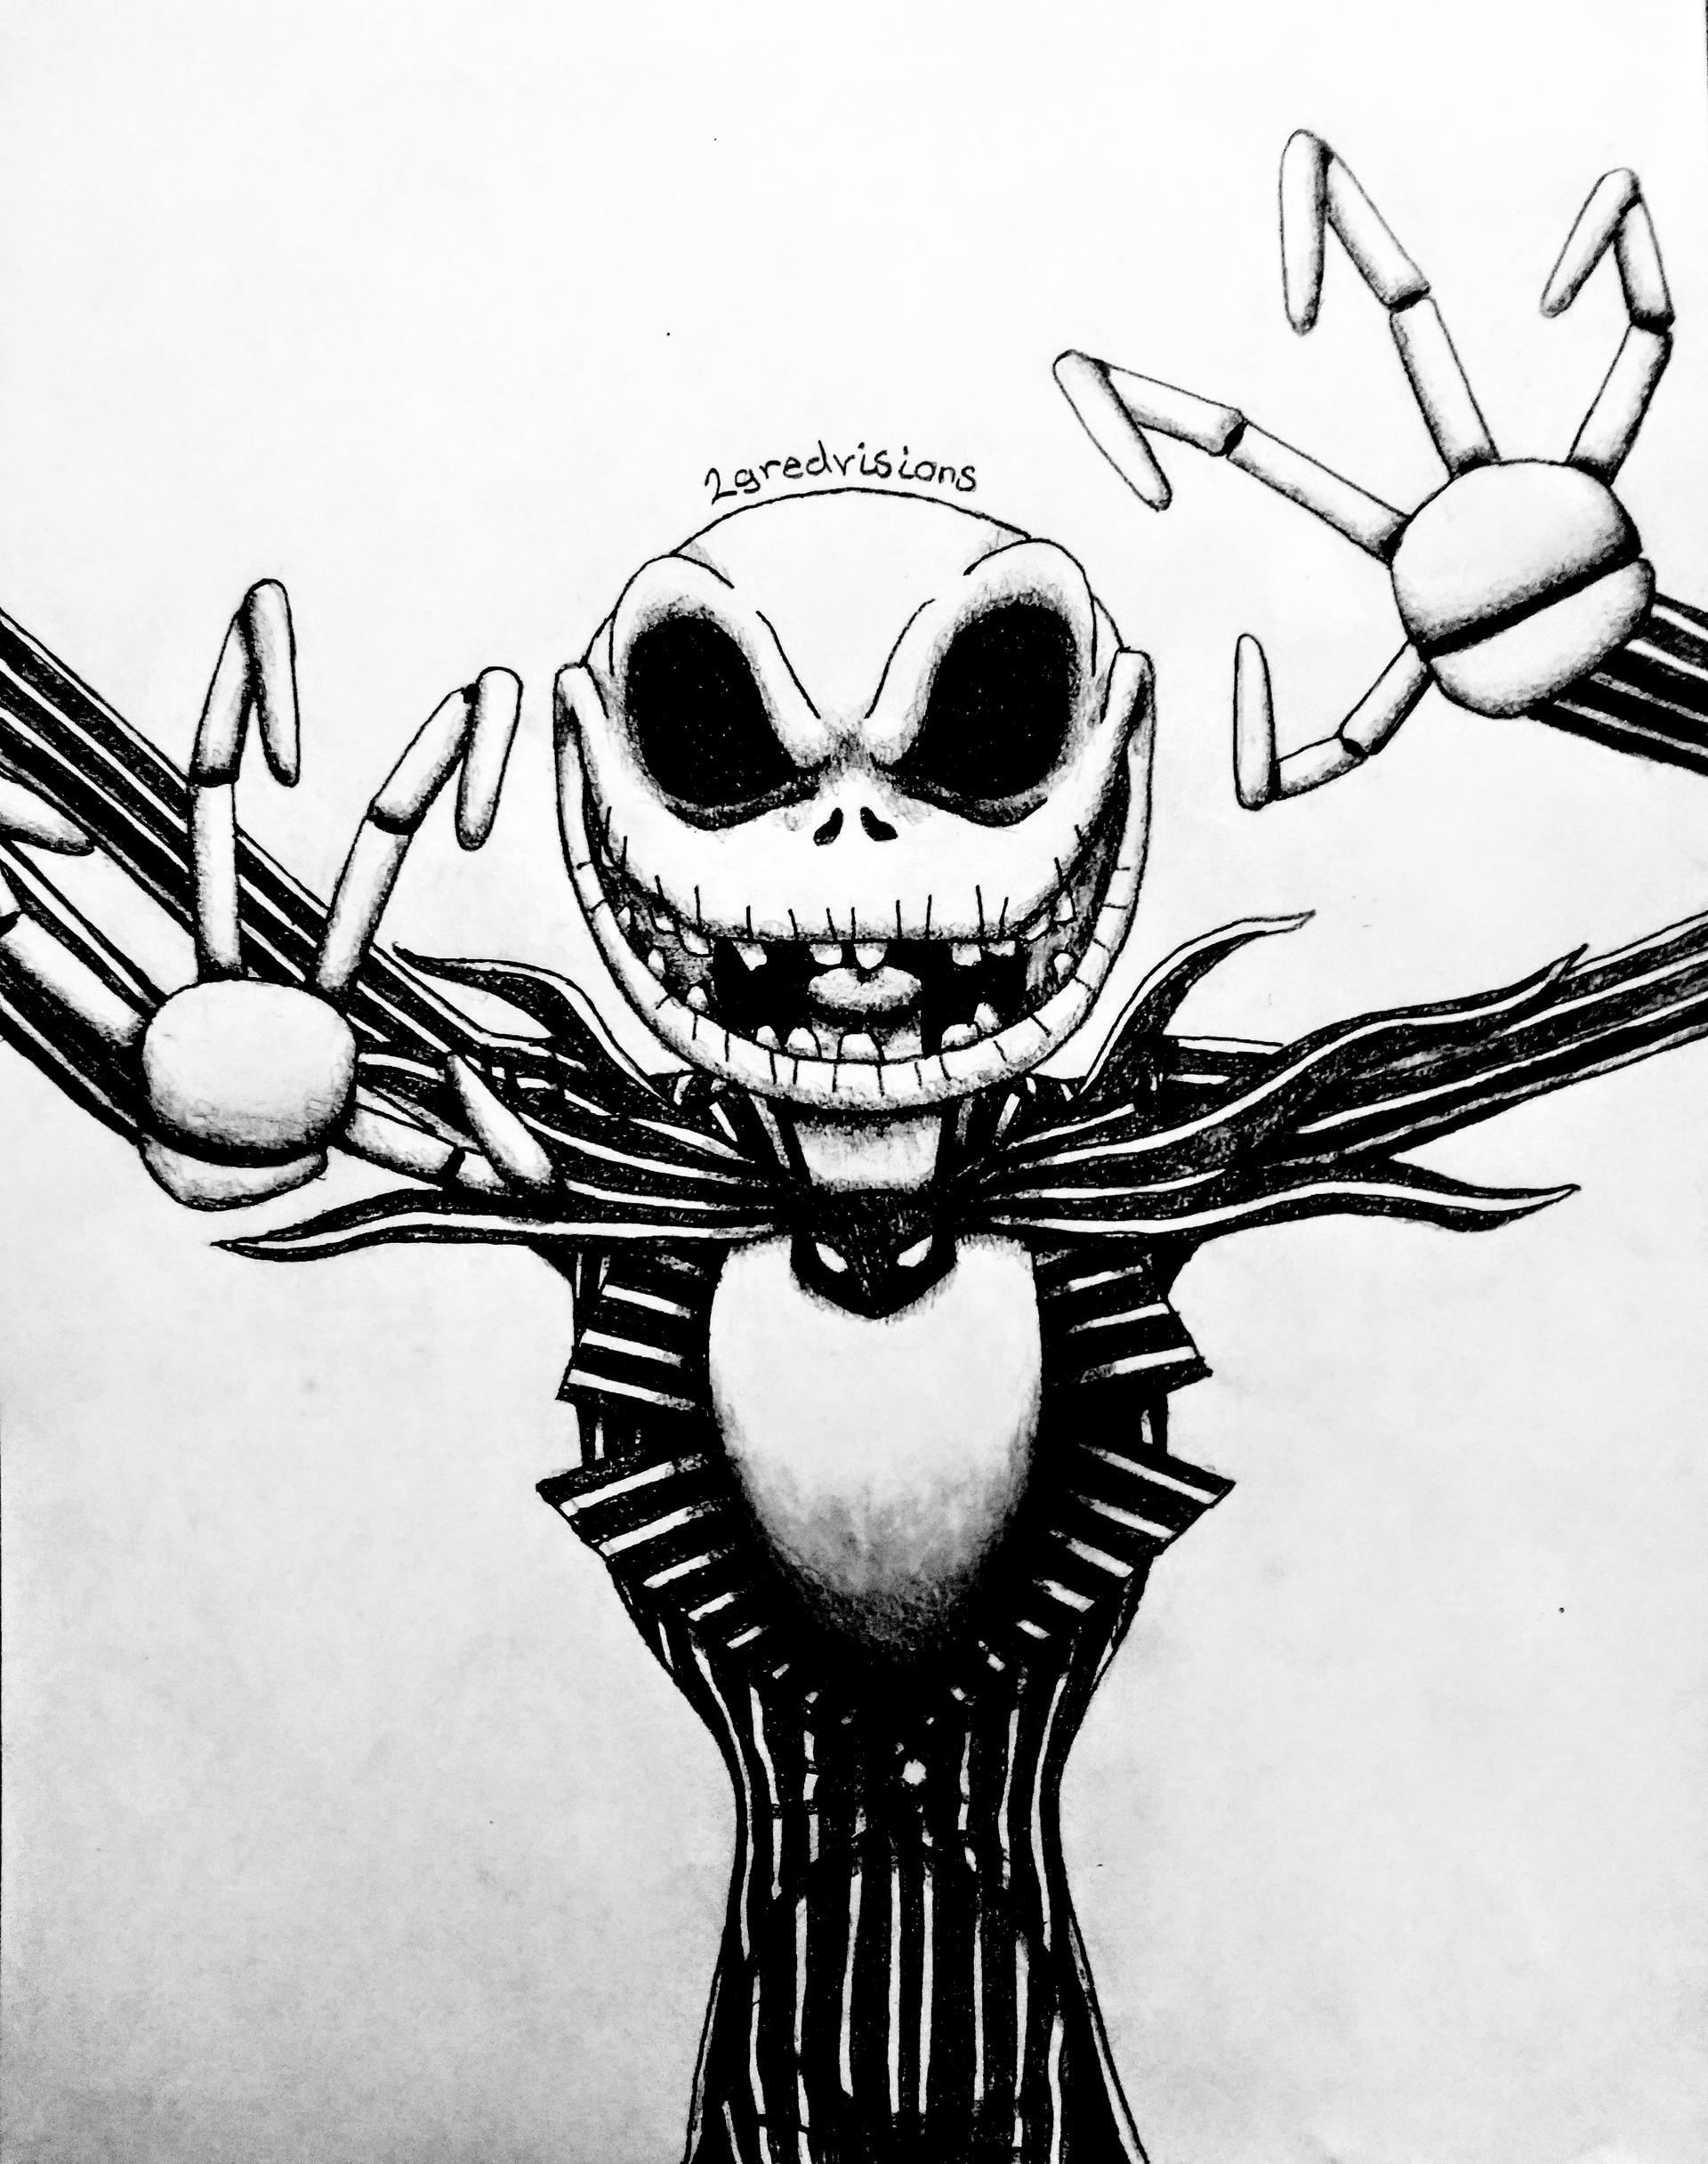 How to Draw Jack Skellington from the Nightmare before Christmas in a Few  Easy Steps